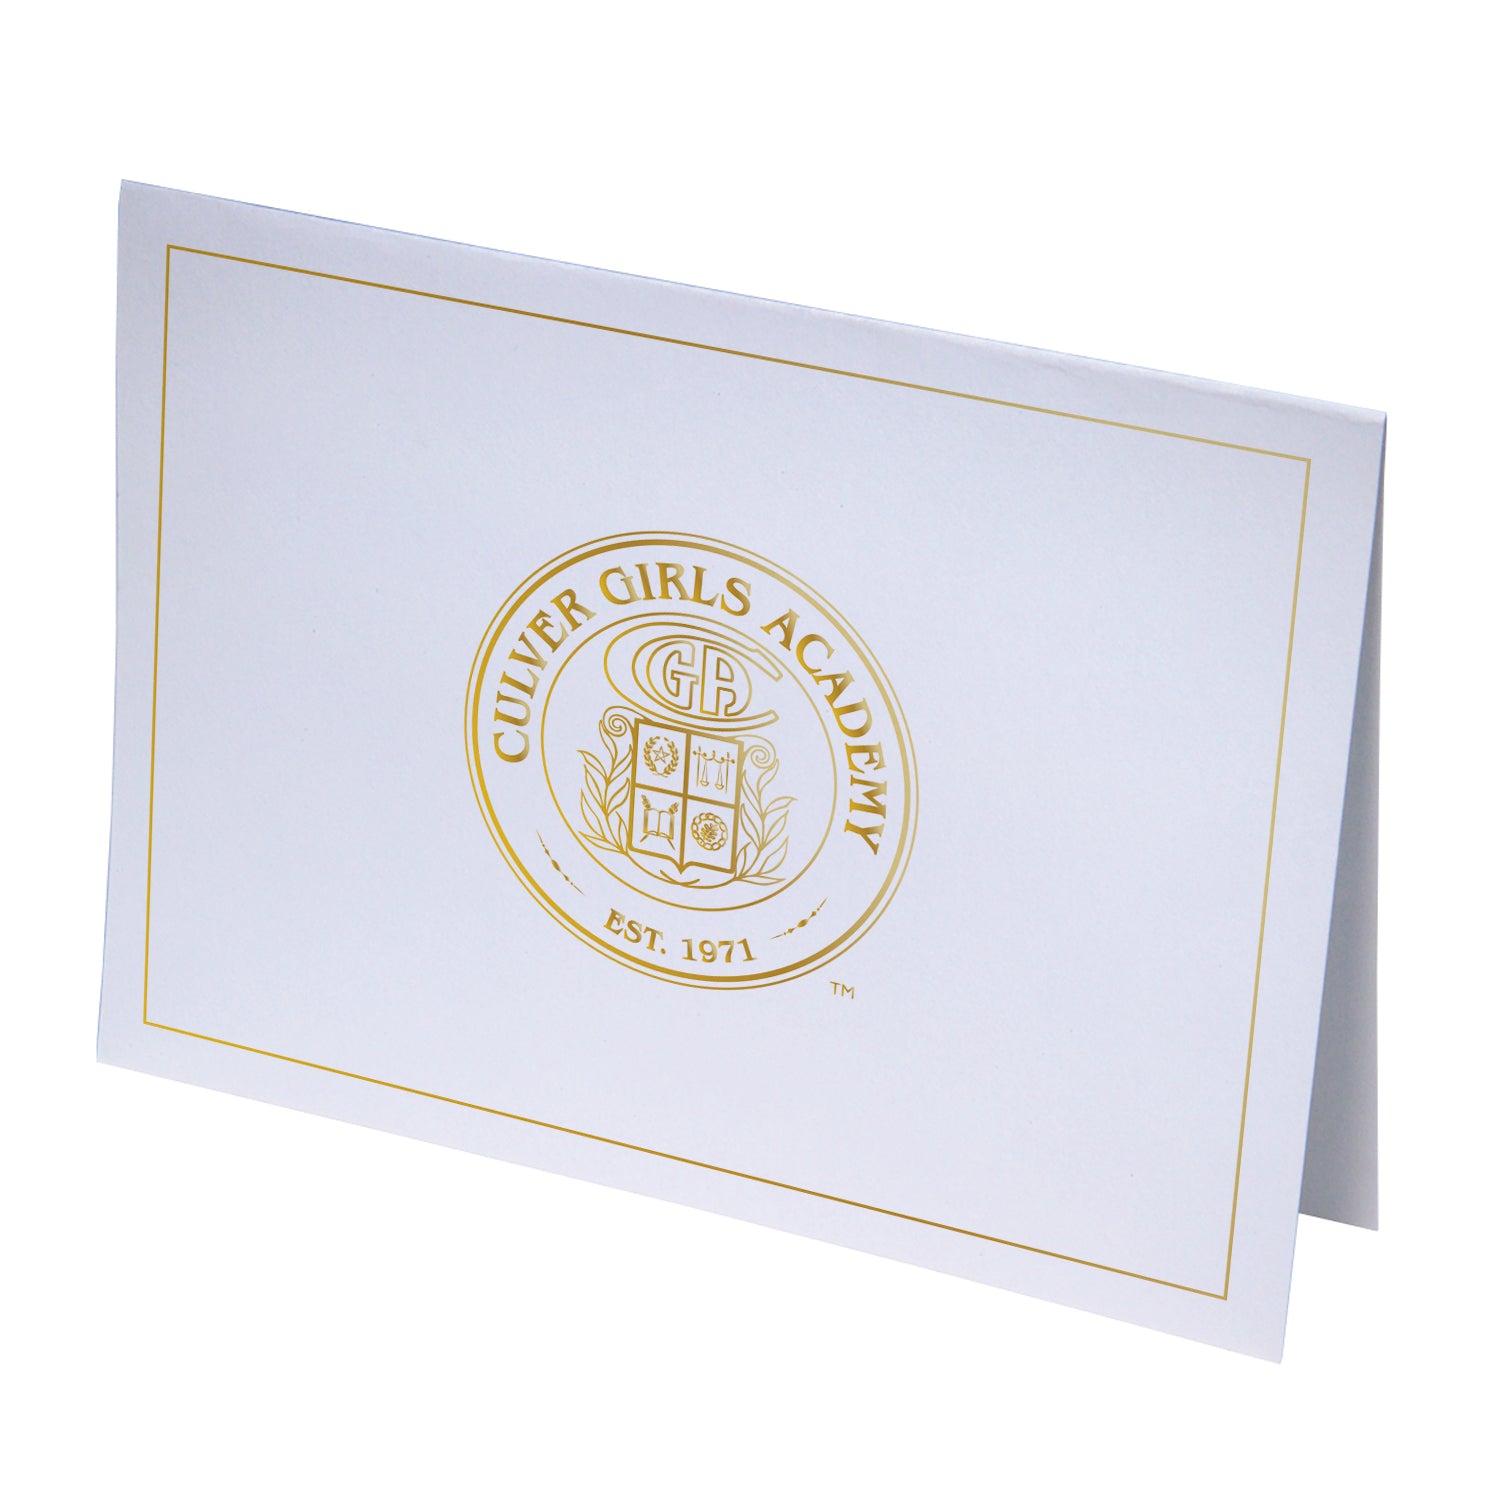 Culver Girls Academy Blank Note Cards - 10 pack